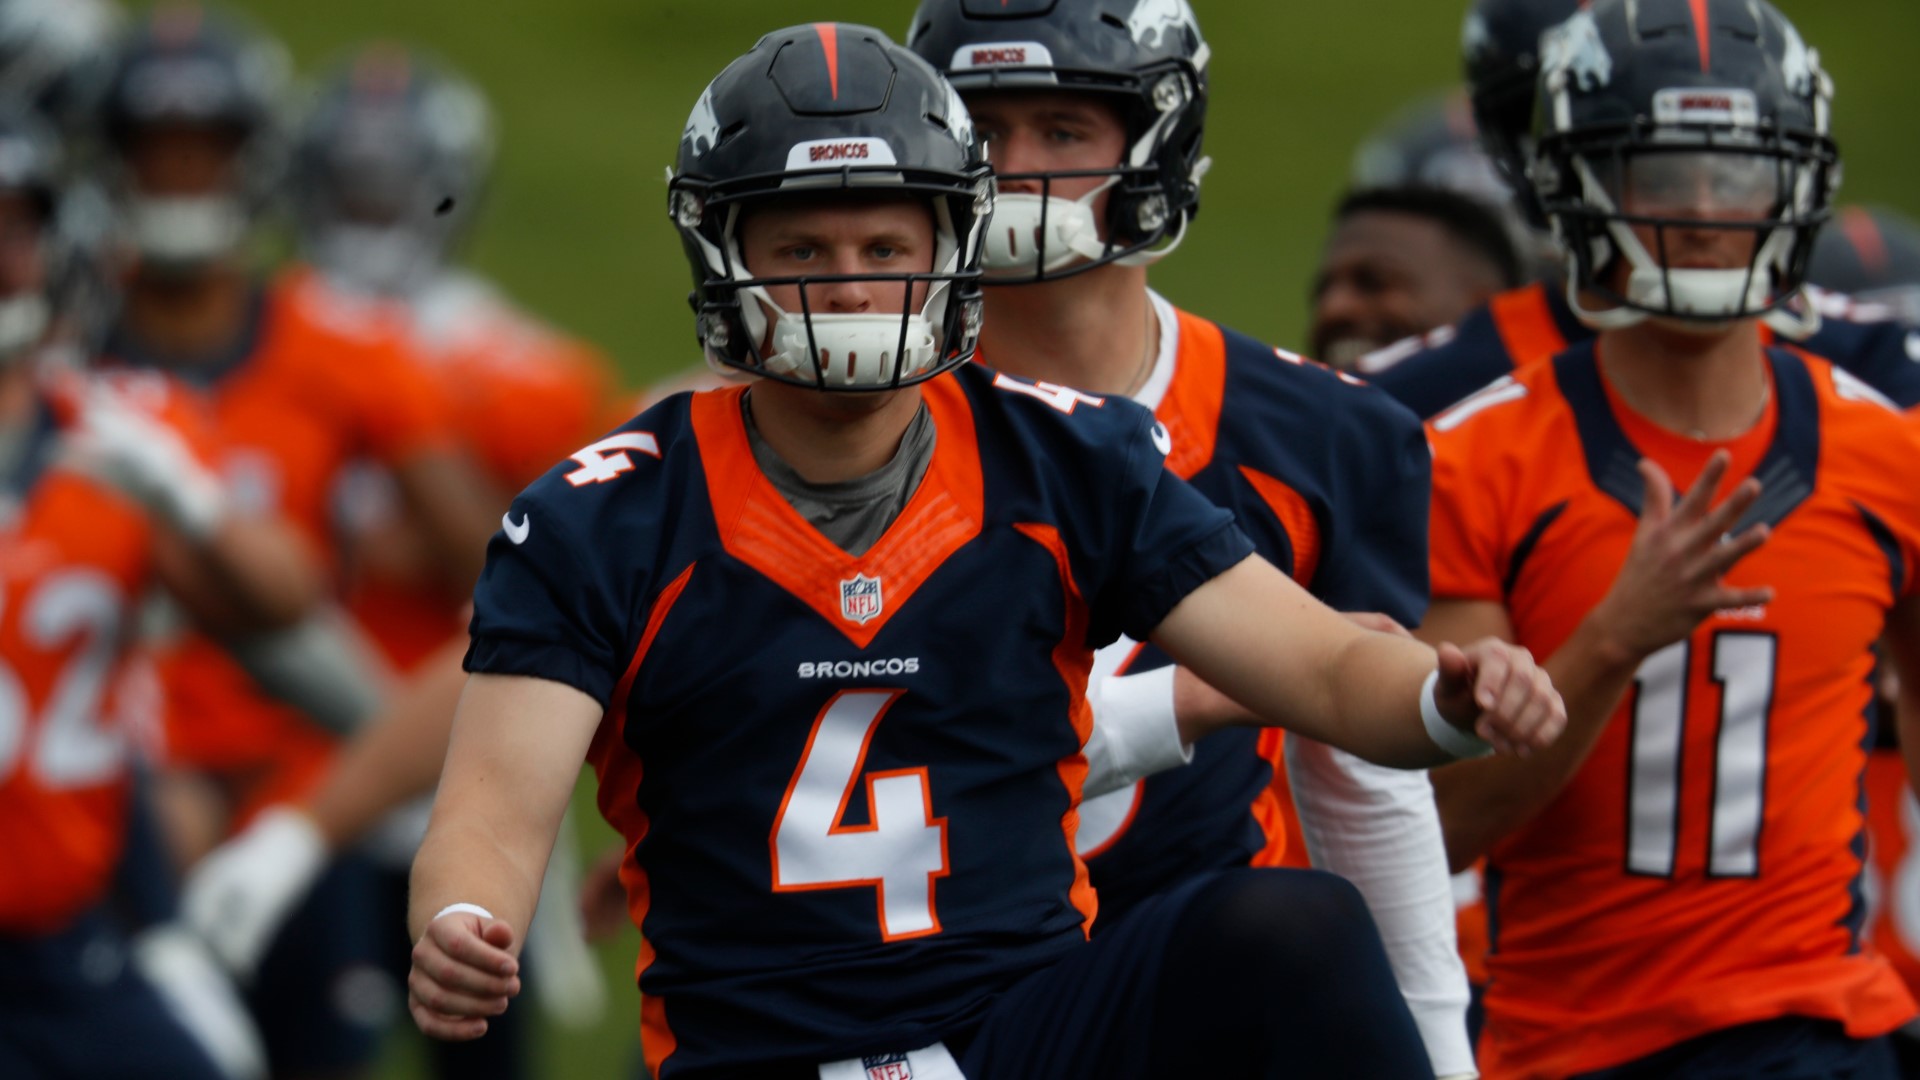 NFL teams will trim 40 percent of their roster this week. Hogan, Rypien, Purcell among Broncos on 53-man roster bubble.